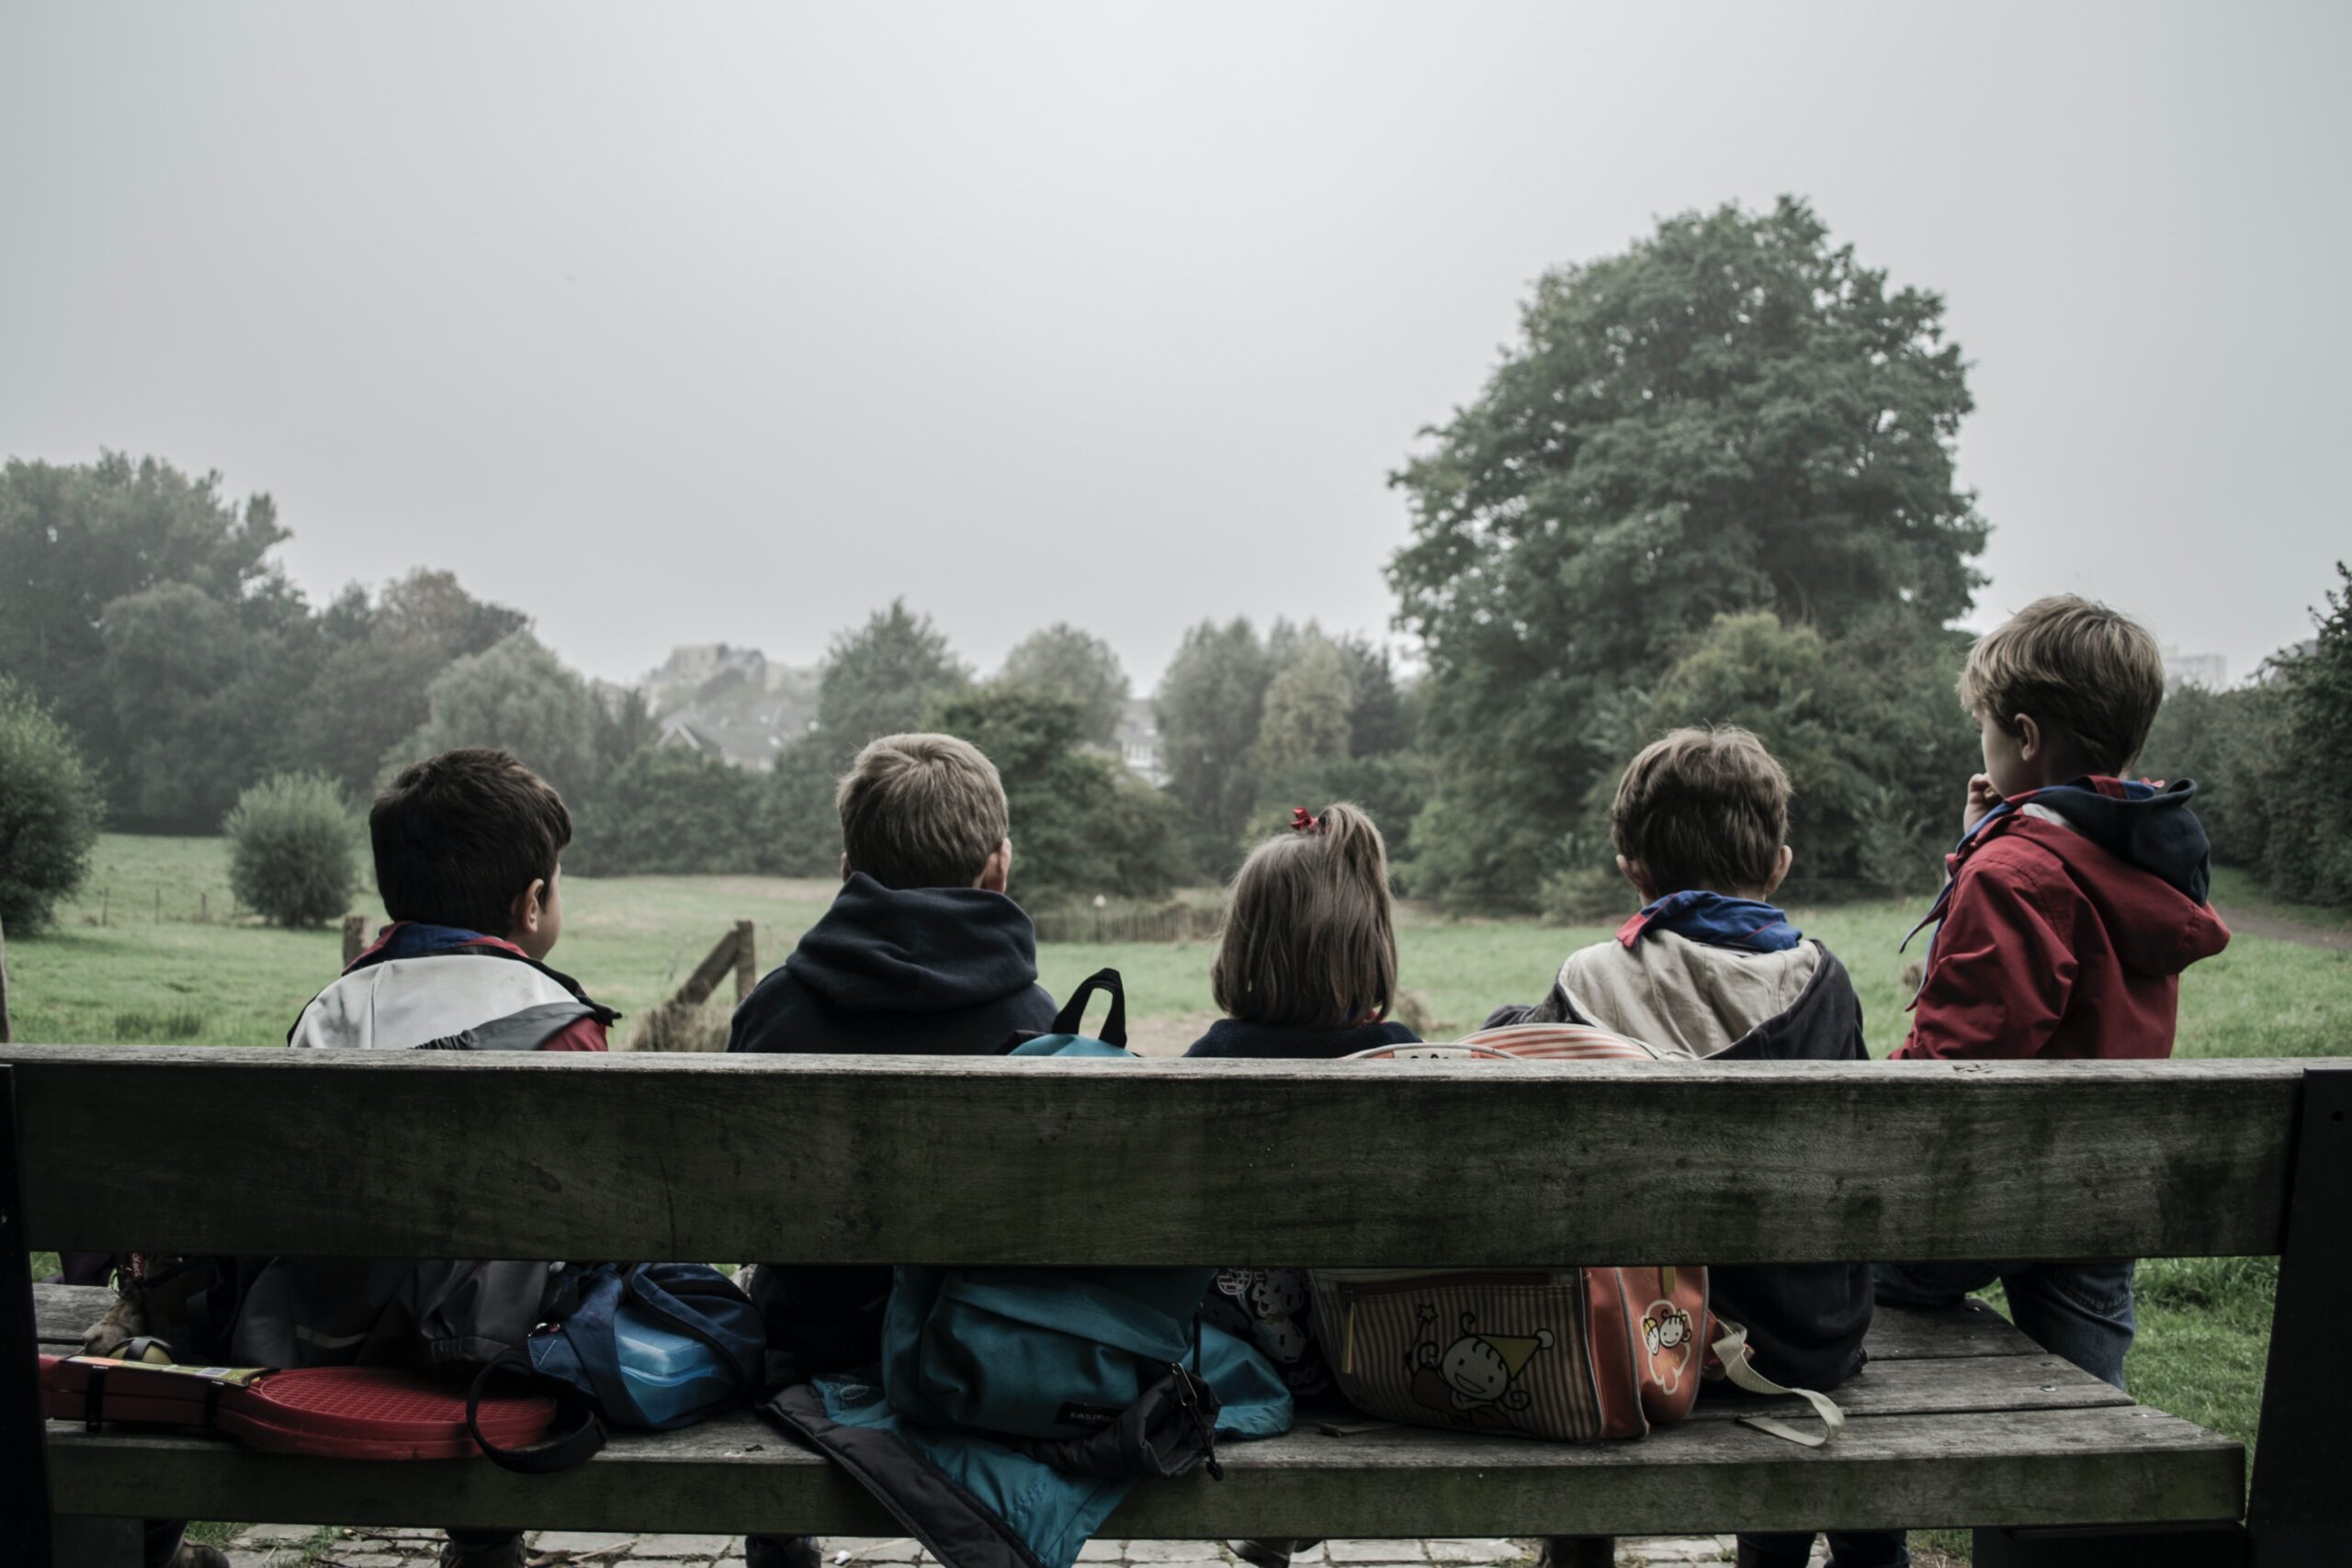 Picture of children quietly sitting on a bench